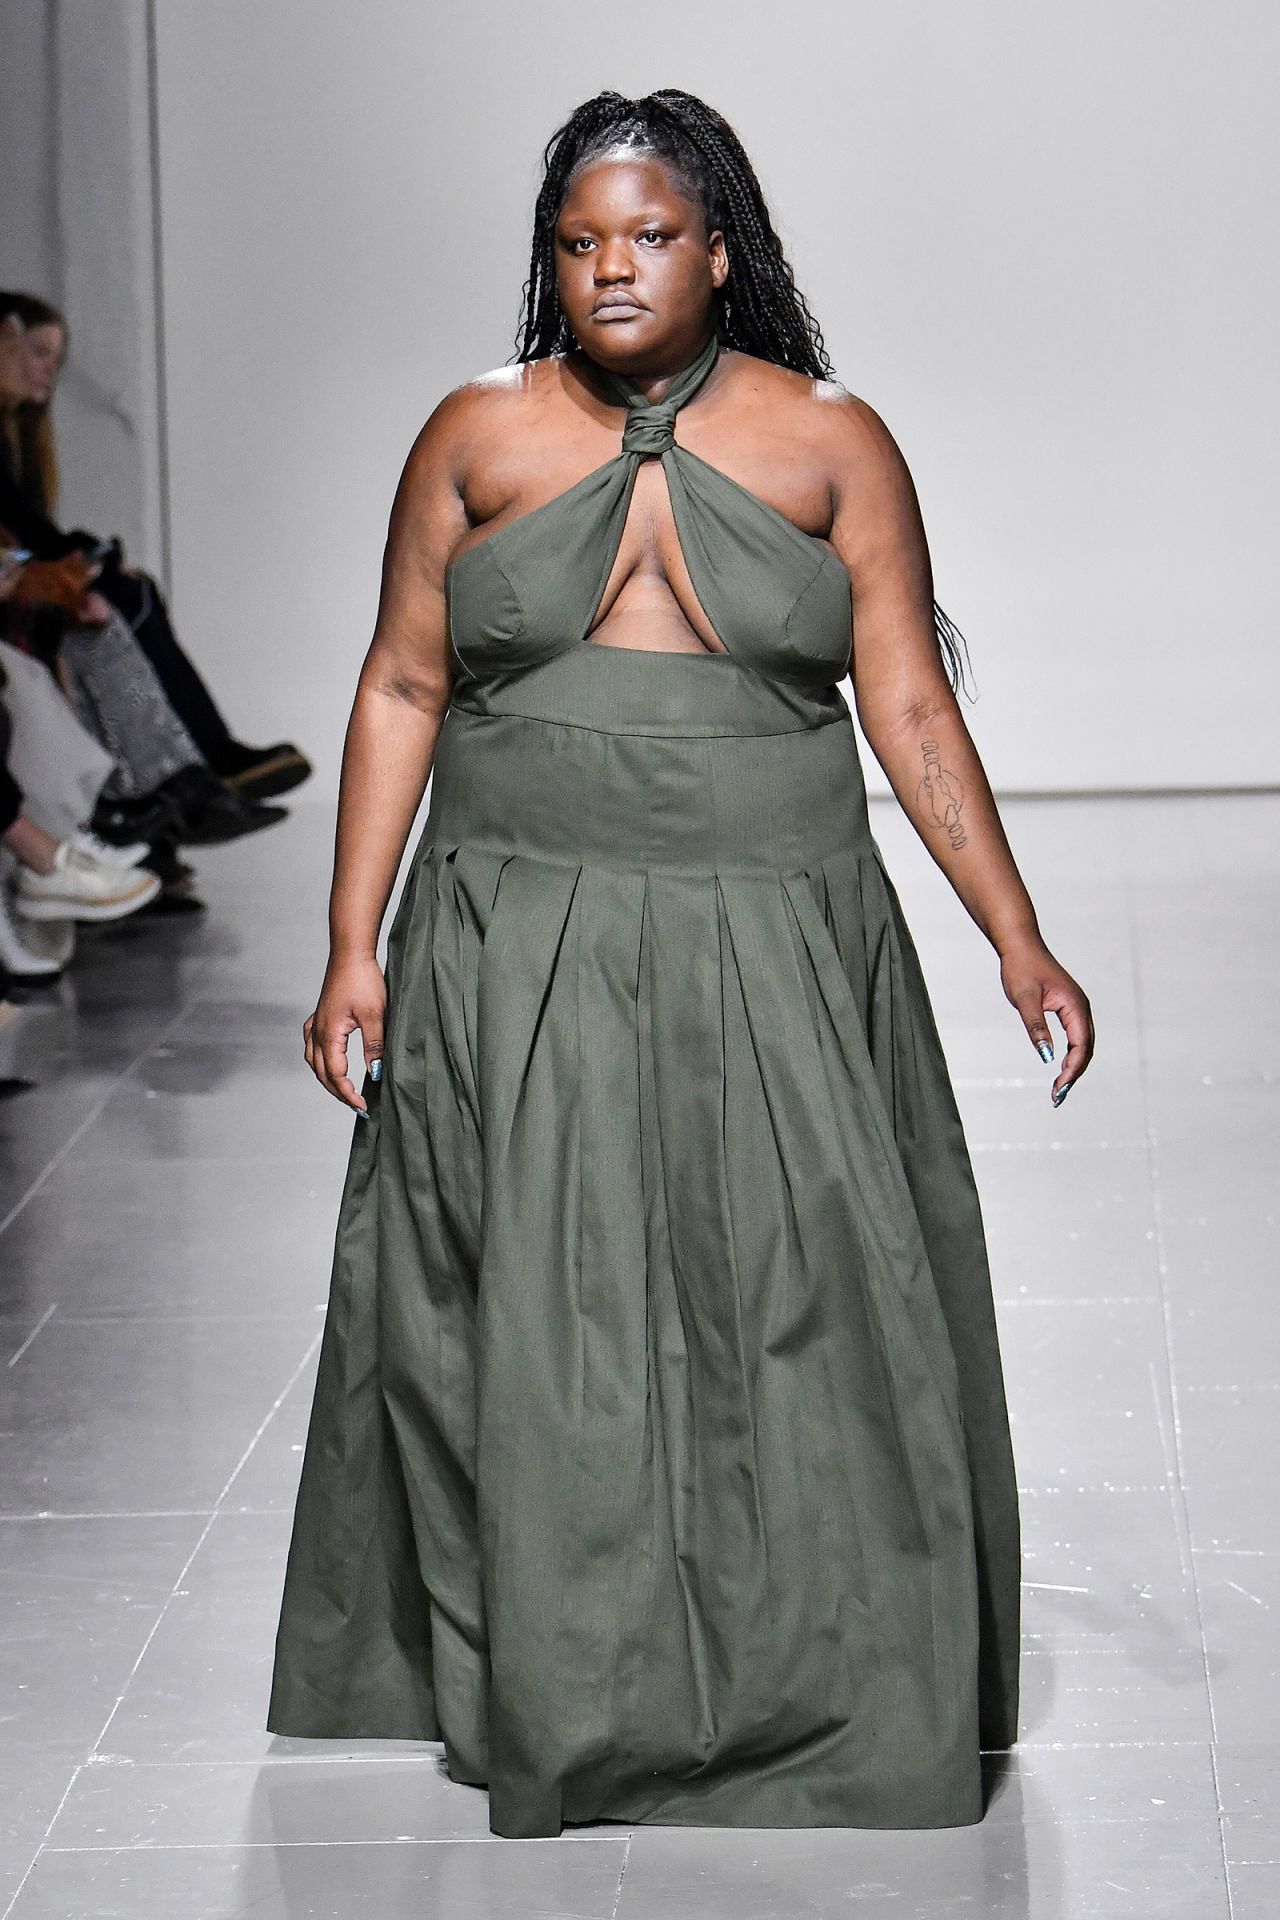 Diverse bodies were celebrated at the Sinead O'Dwyer show.